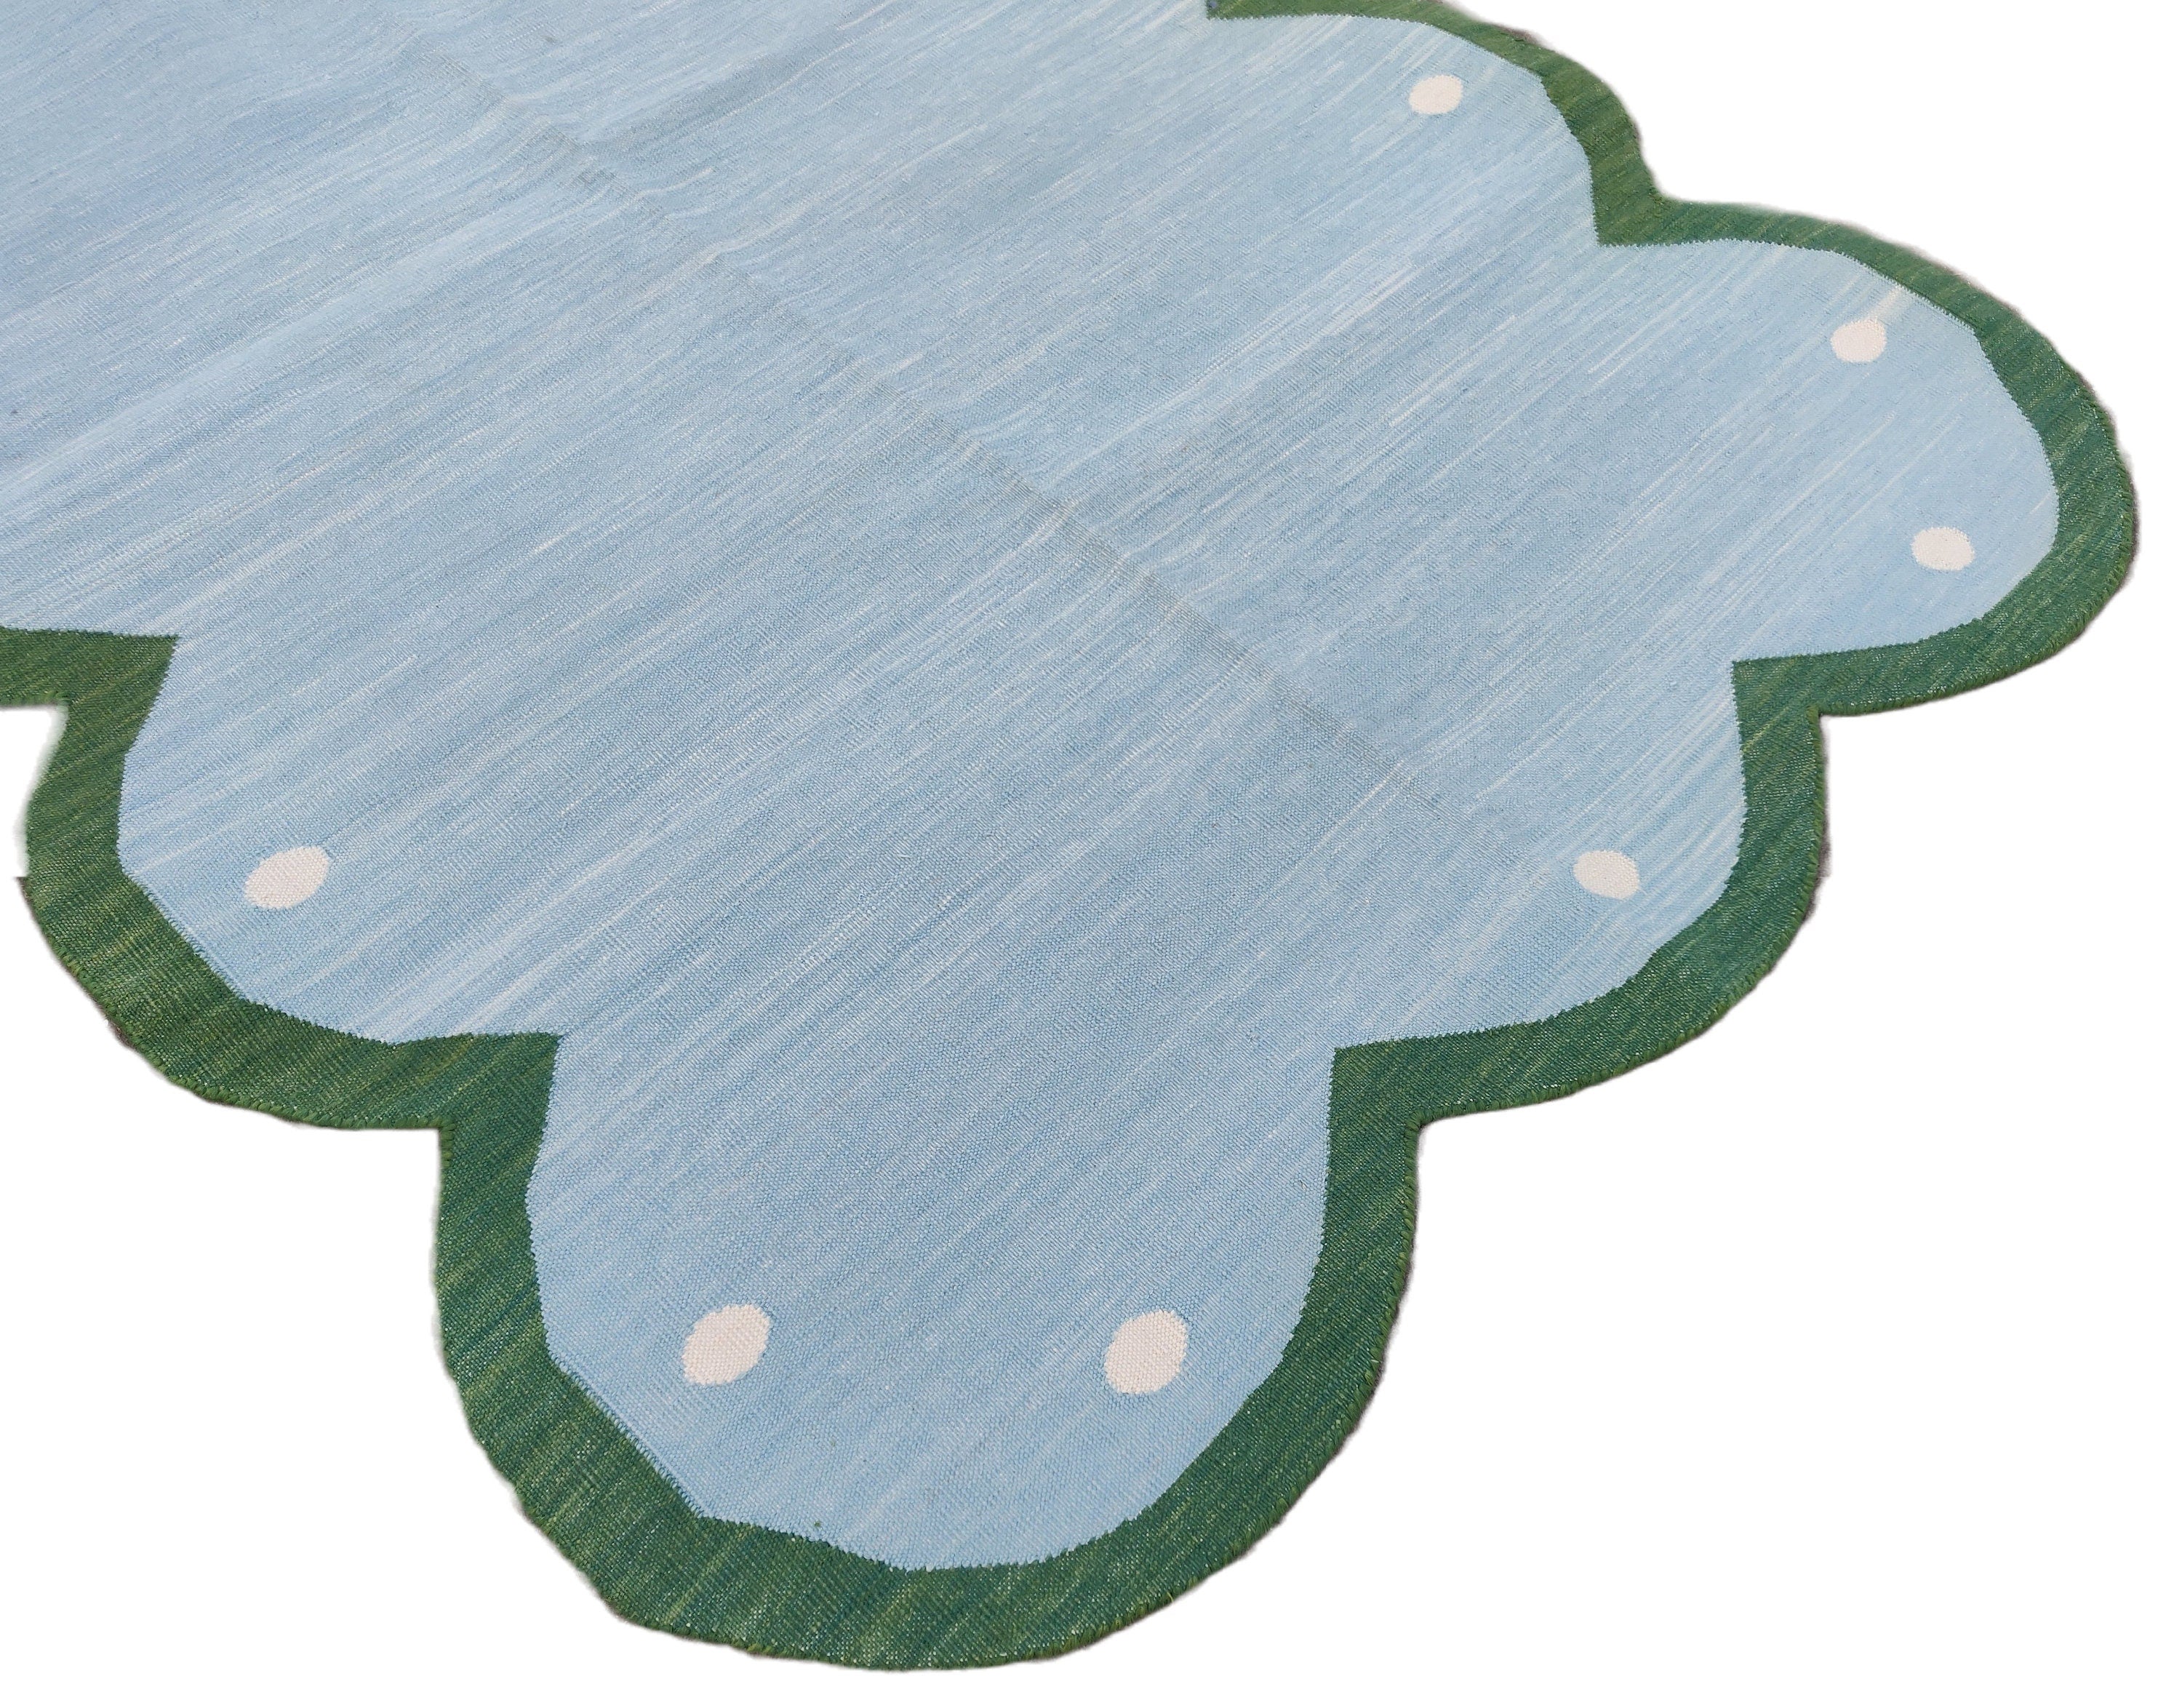 Handmade Cotton Area Flat Weave Rug, Blue & Green Scalloped Edge Indian Dhurrie